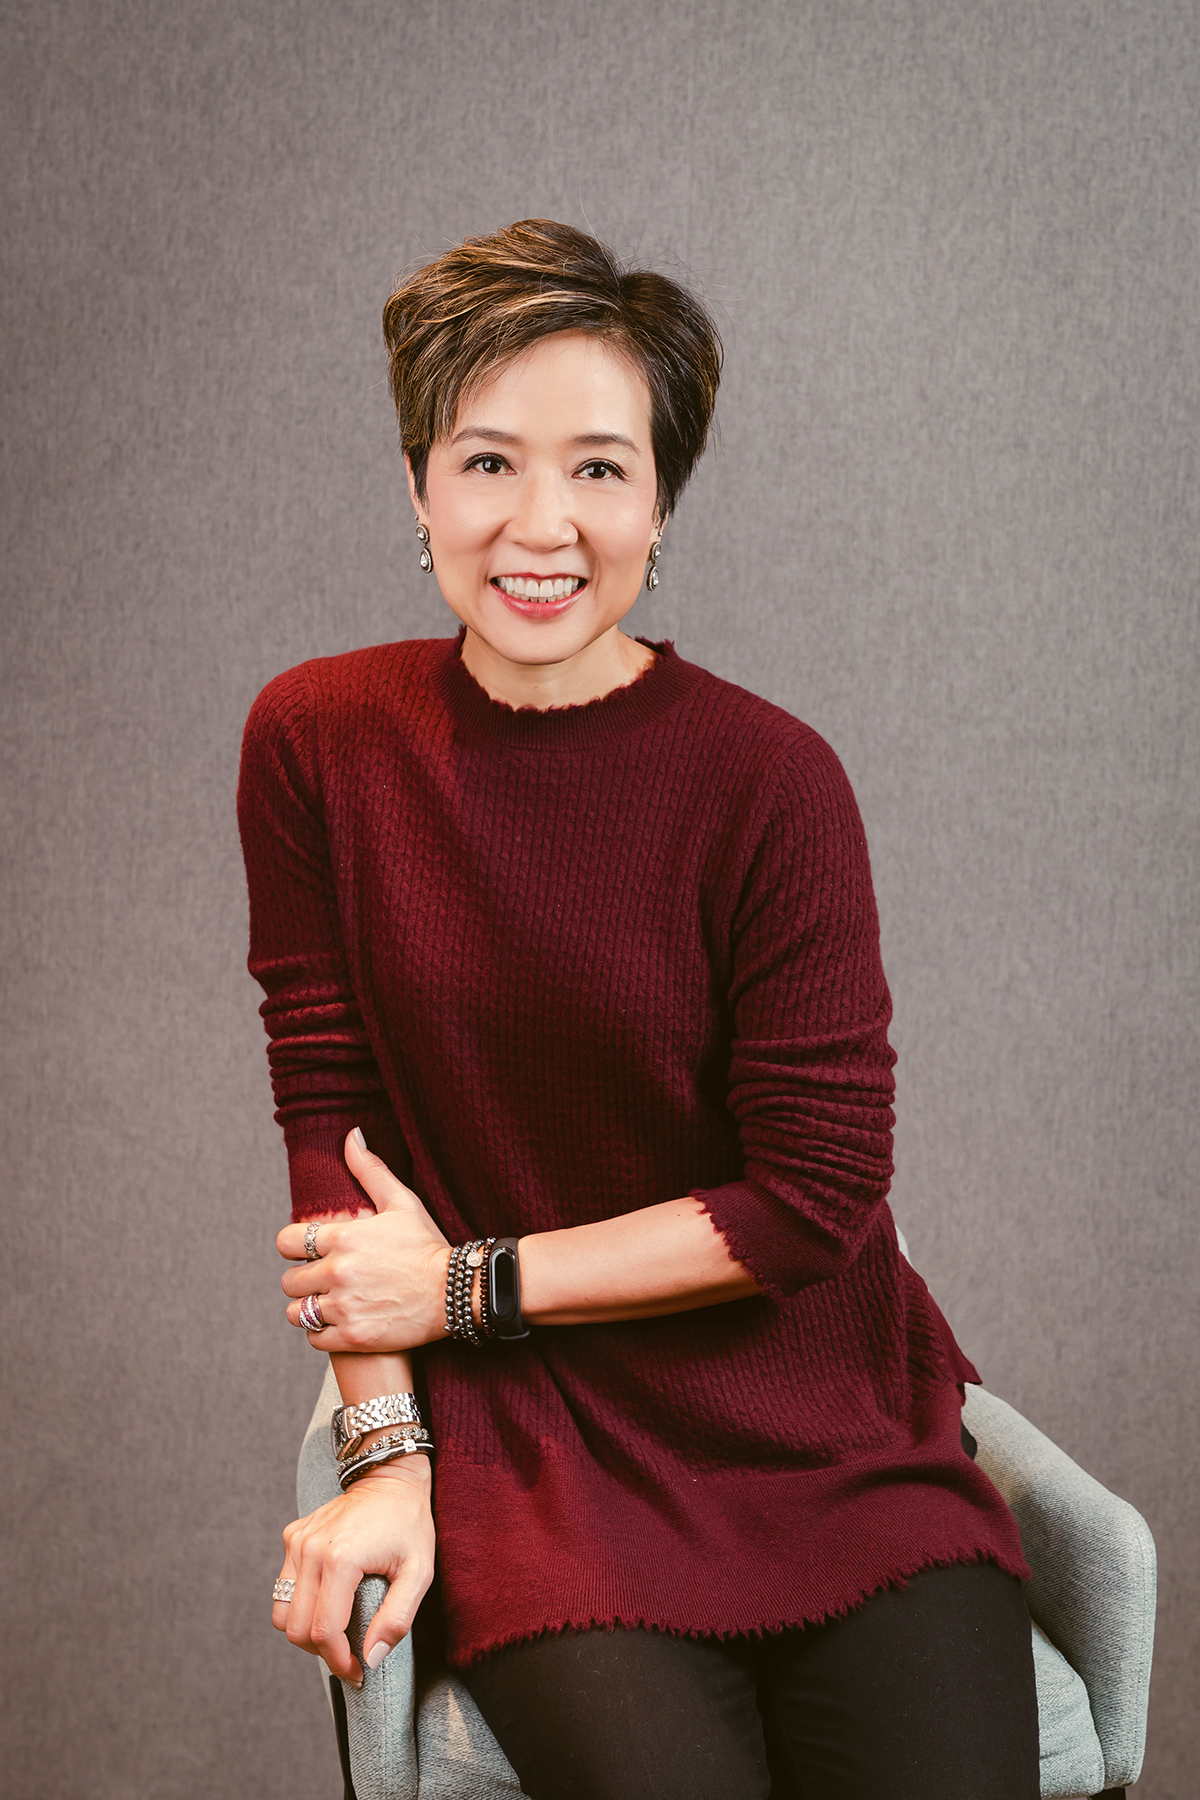 a woman in a red jumper sitting on a chair wearing bracelets and a watch